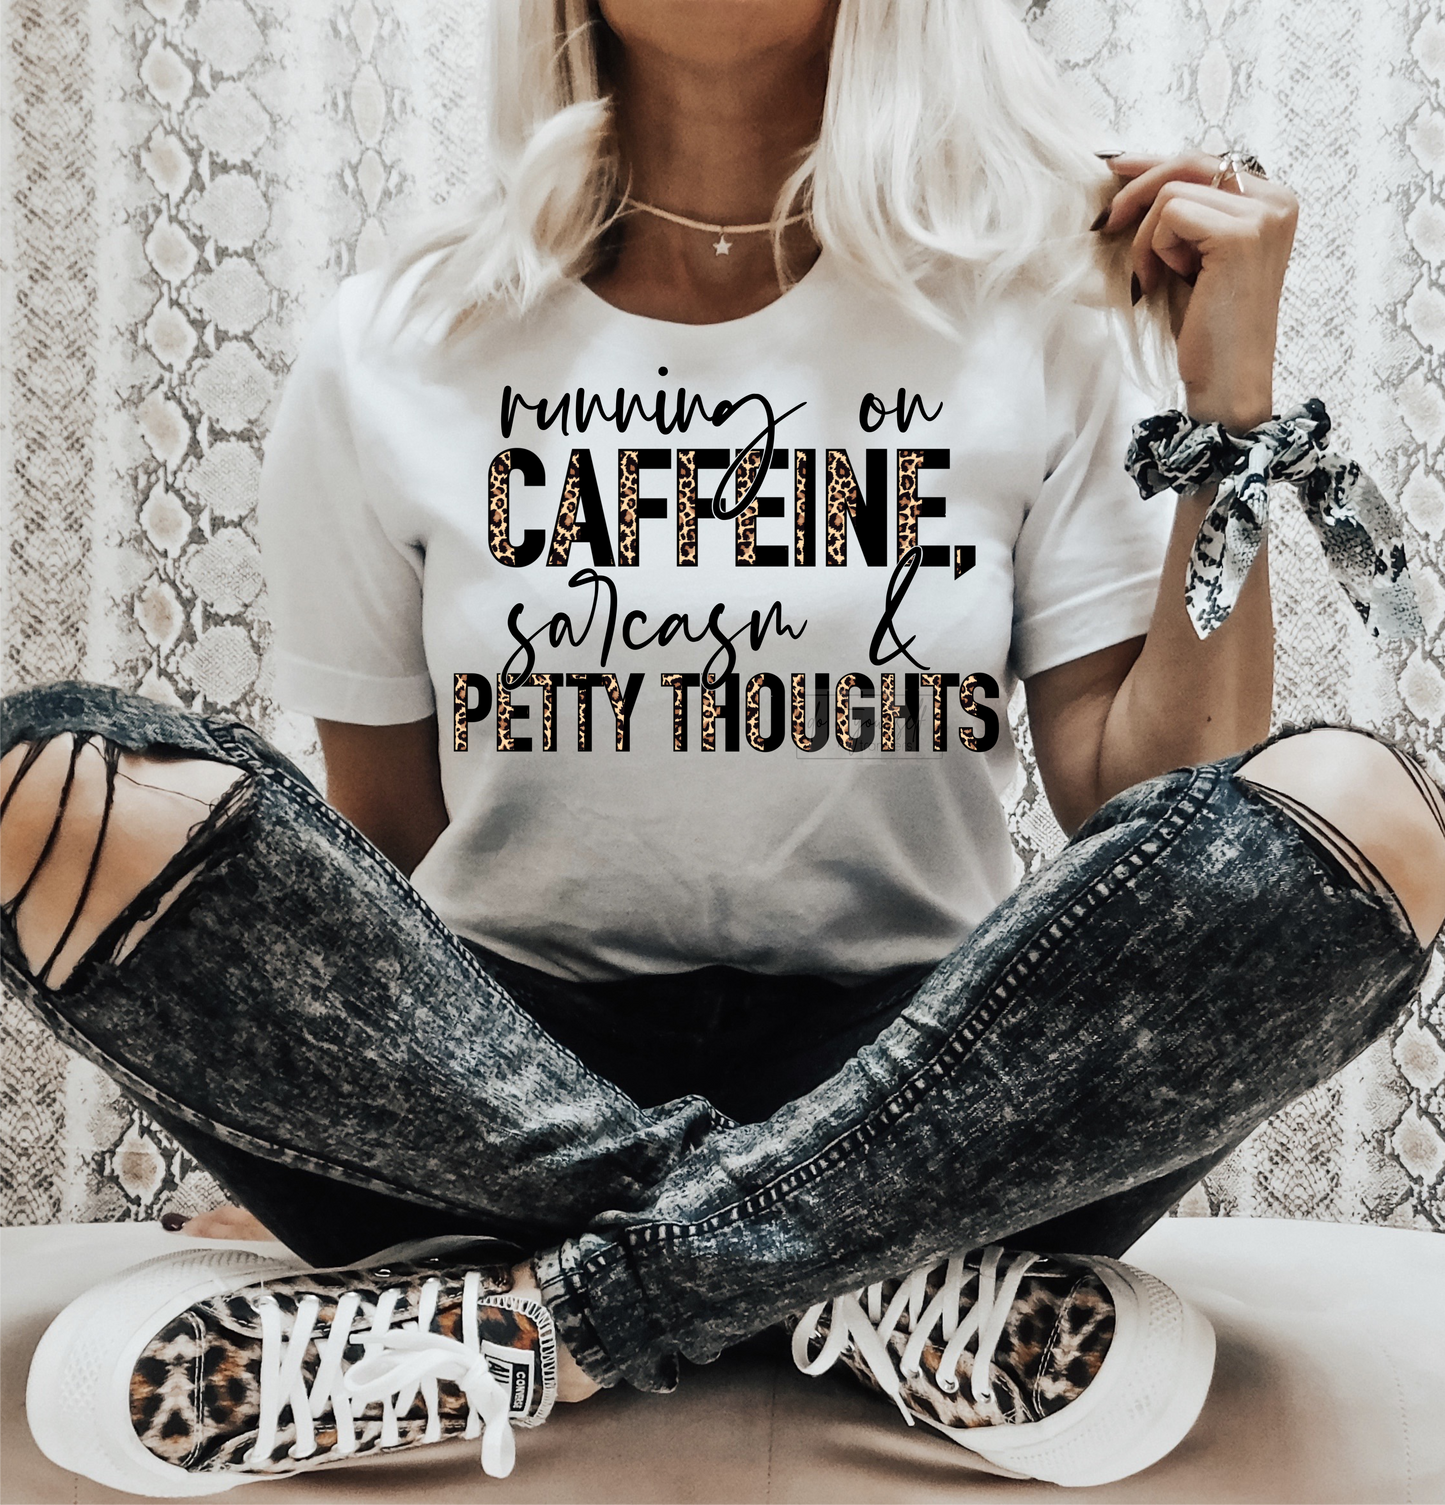 Ruinning on Caffeine, Sarcasm & Petty thoughts leopard black writing  size ADULT  DTF TRANSFERPRINT TO ORDER